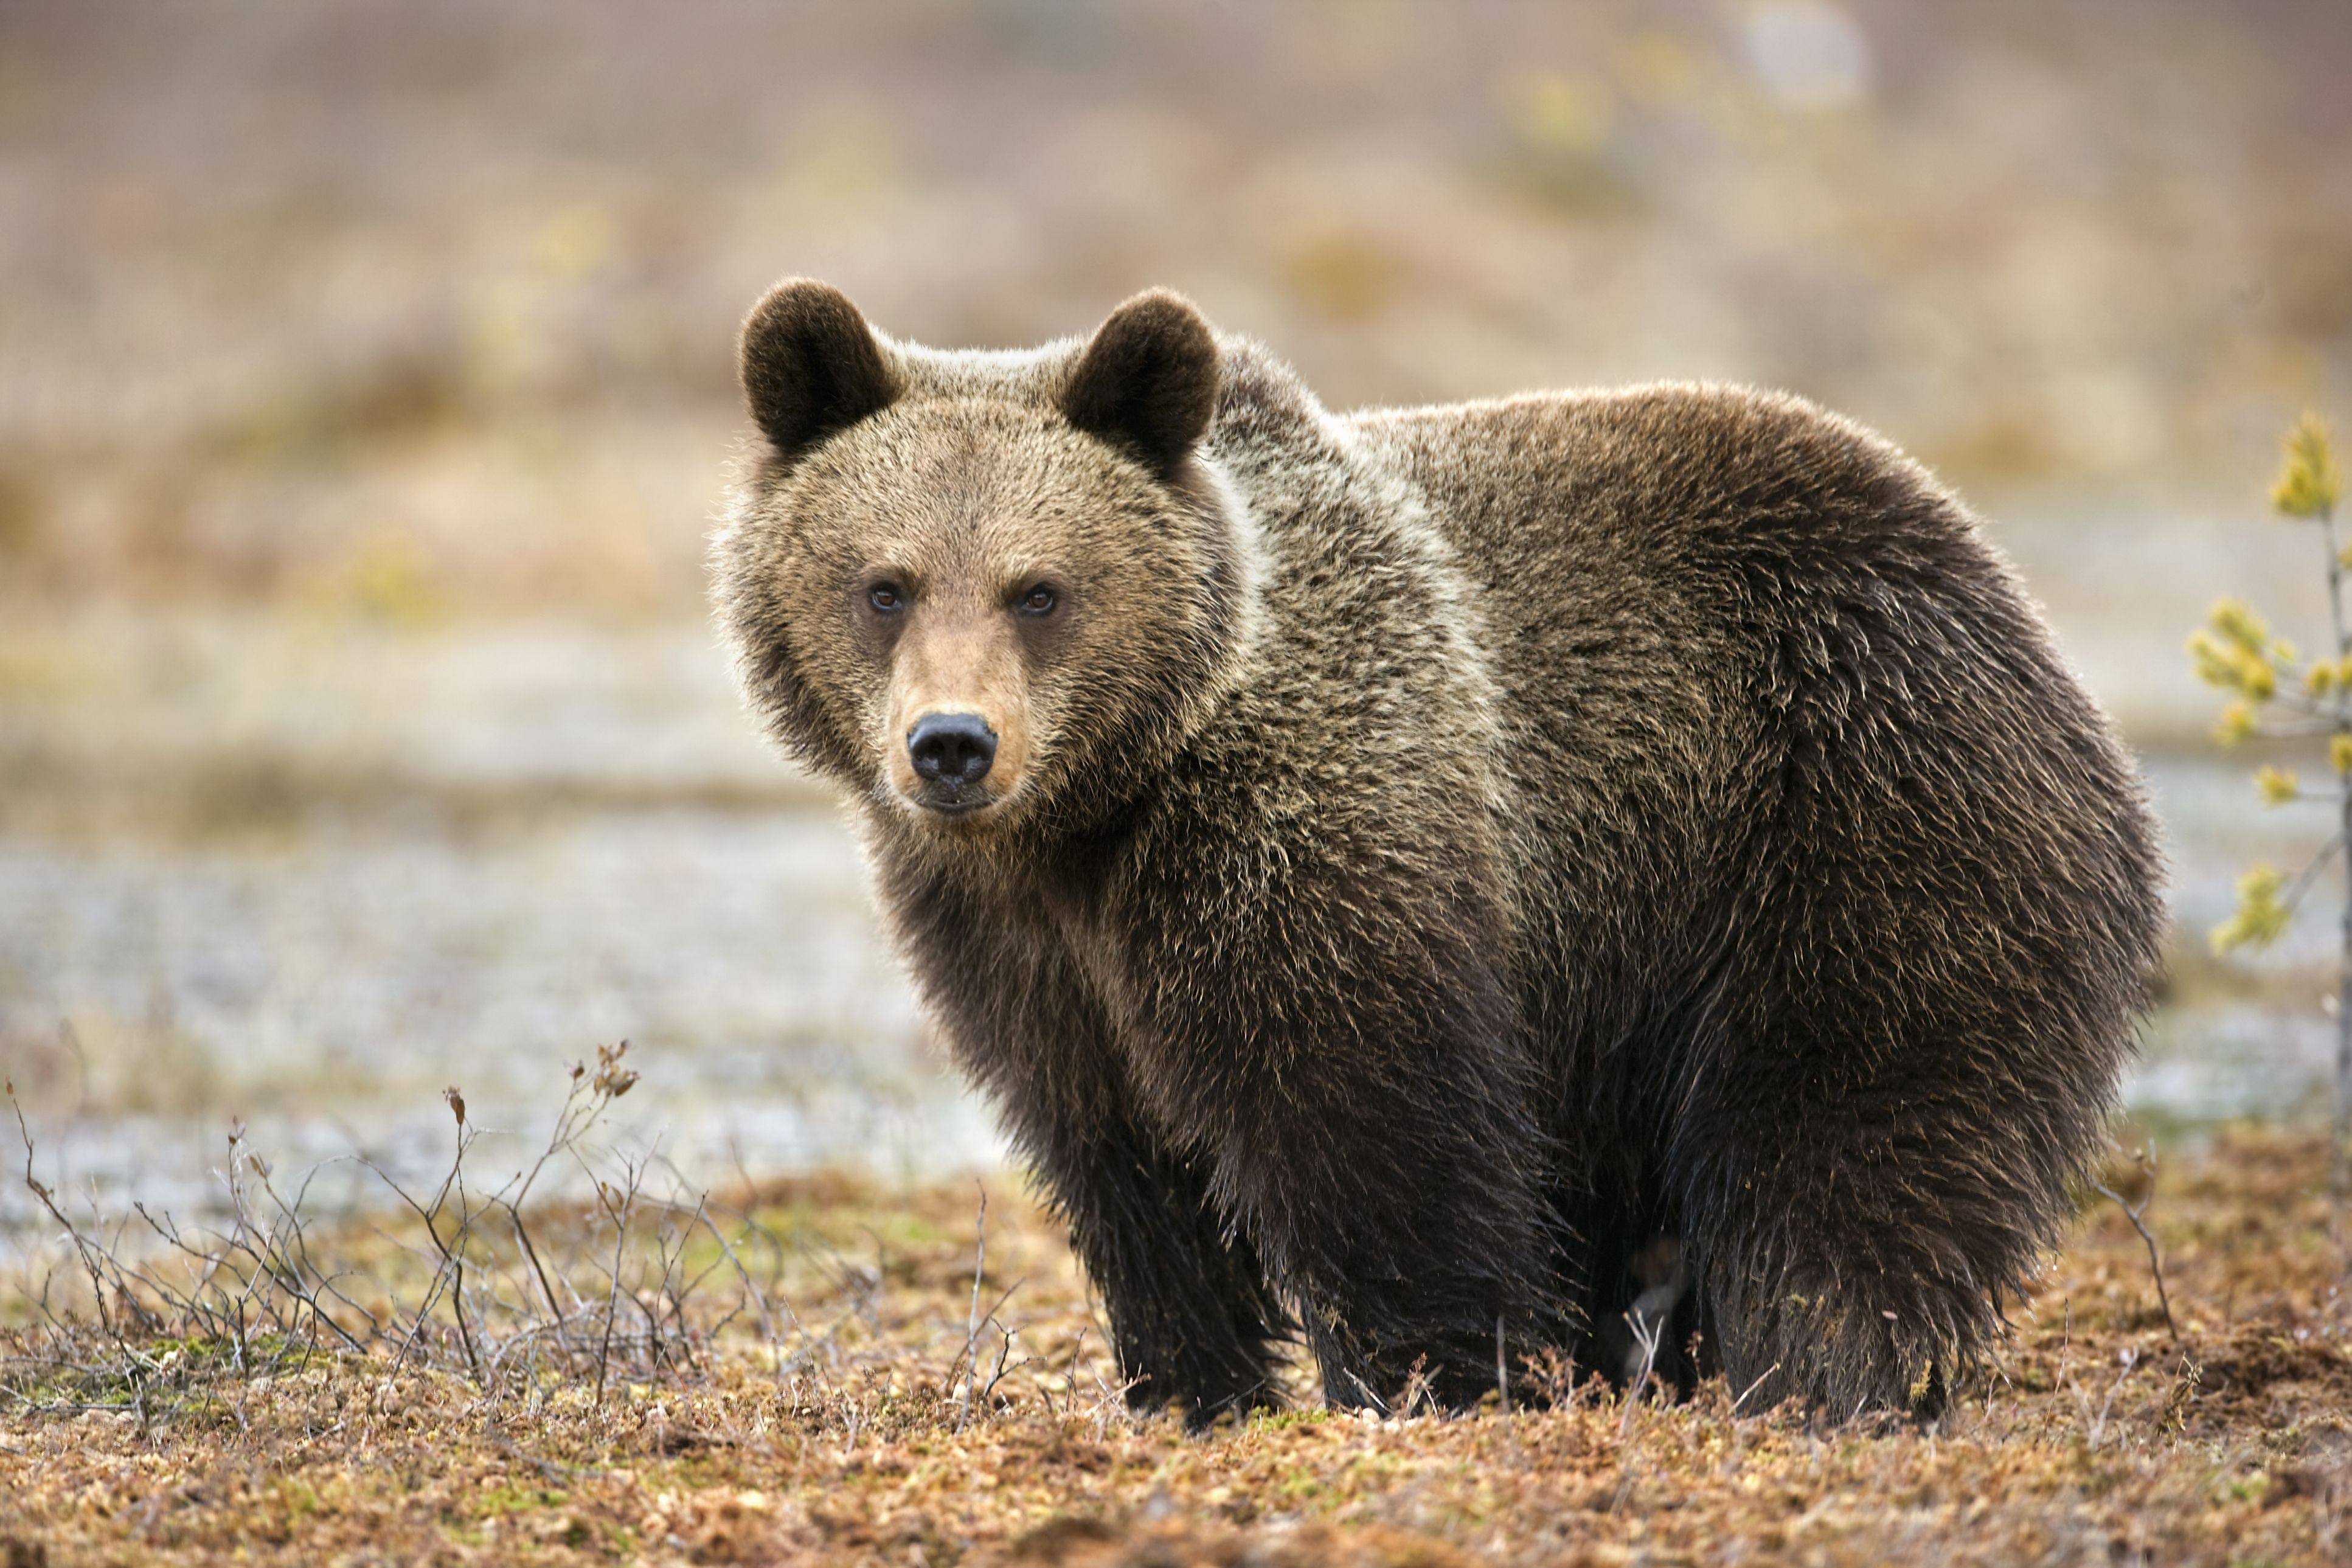 How To Deal With Brown Bears